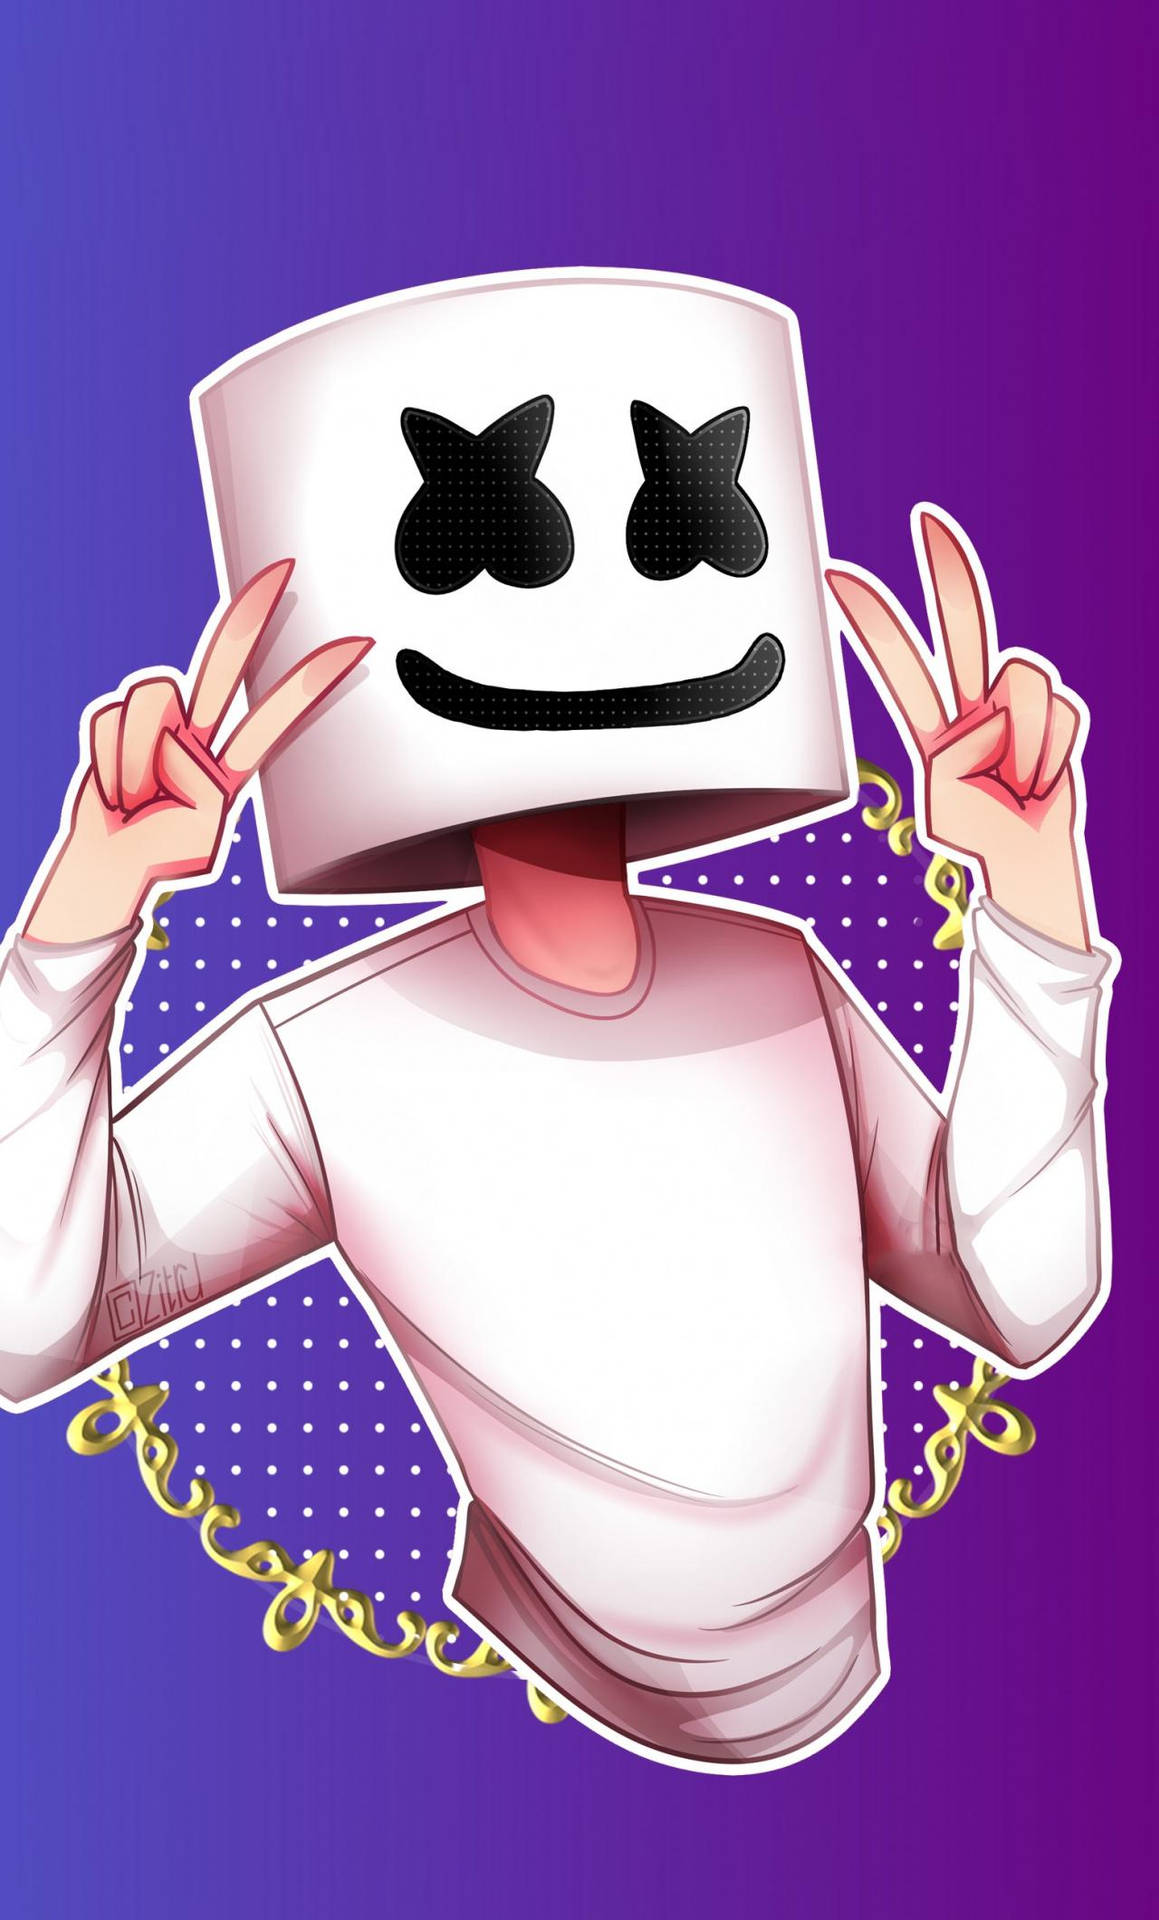 Exciting Marshmello Themed Iphone Wallpaper Background